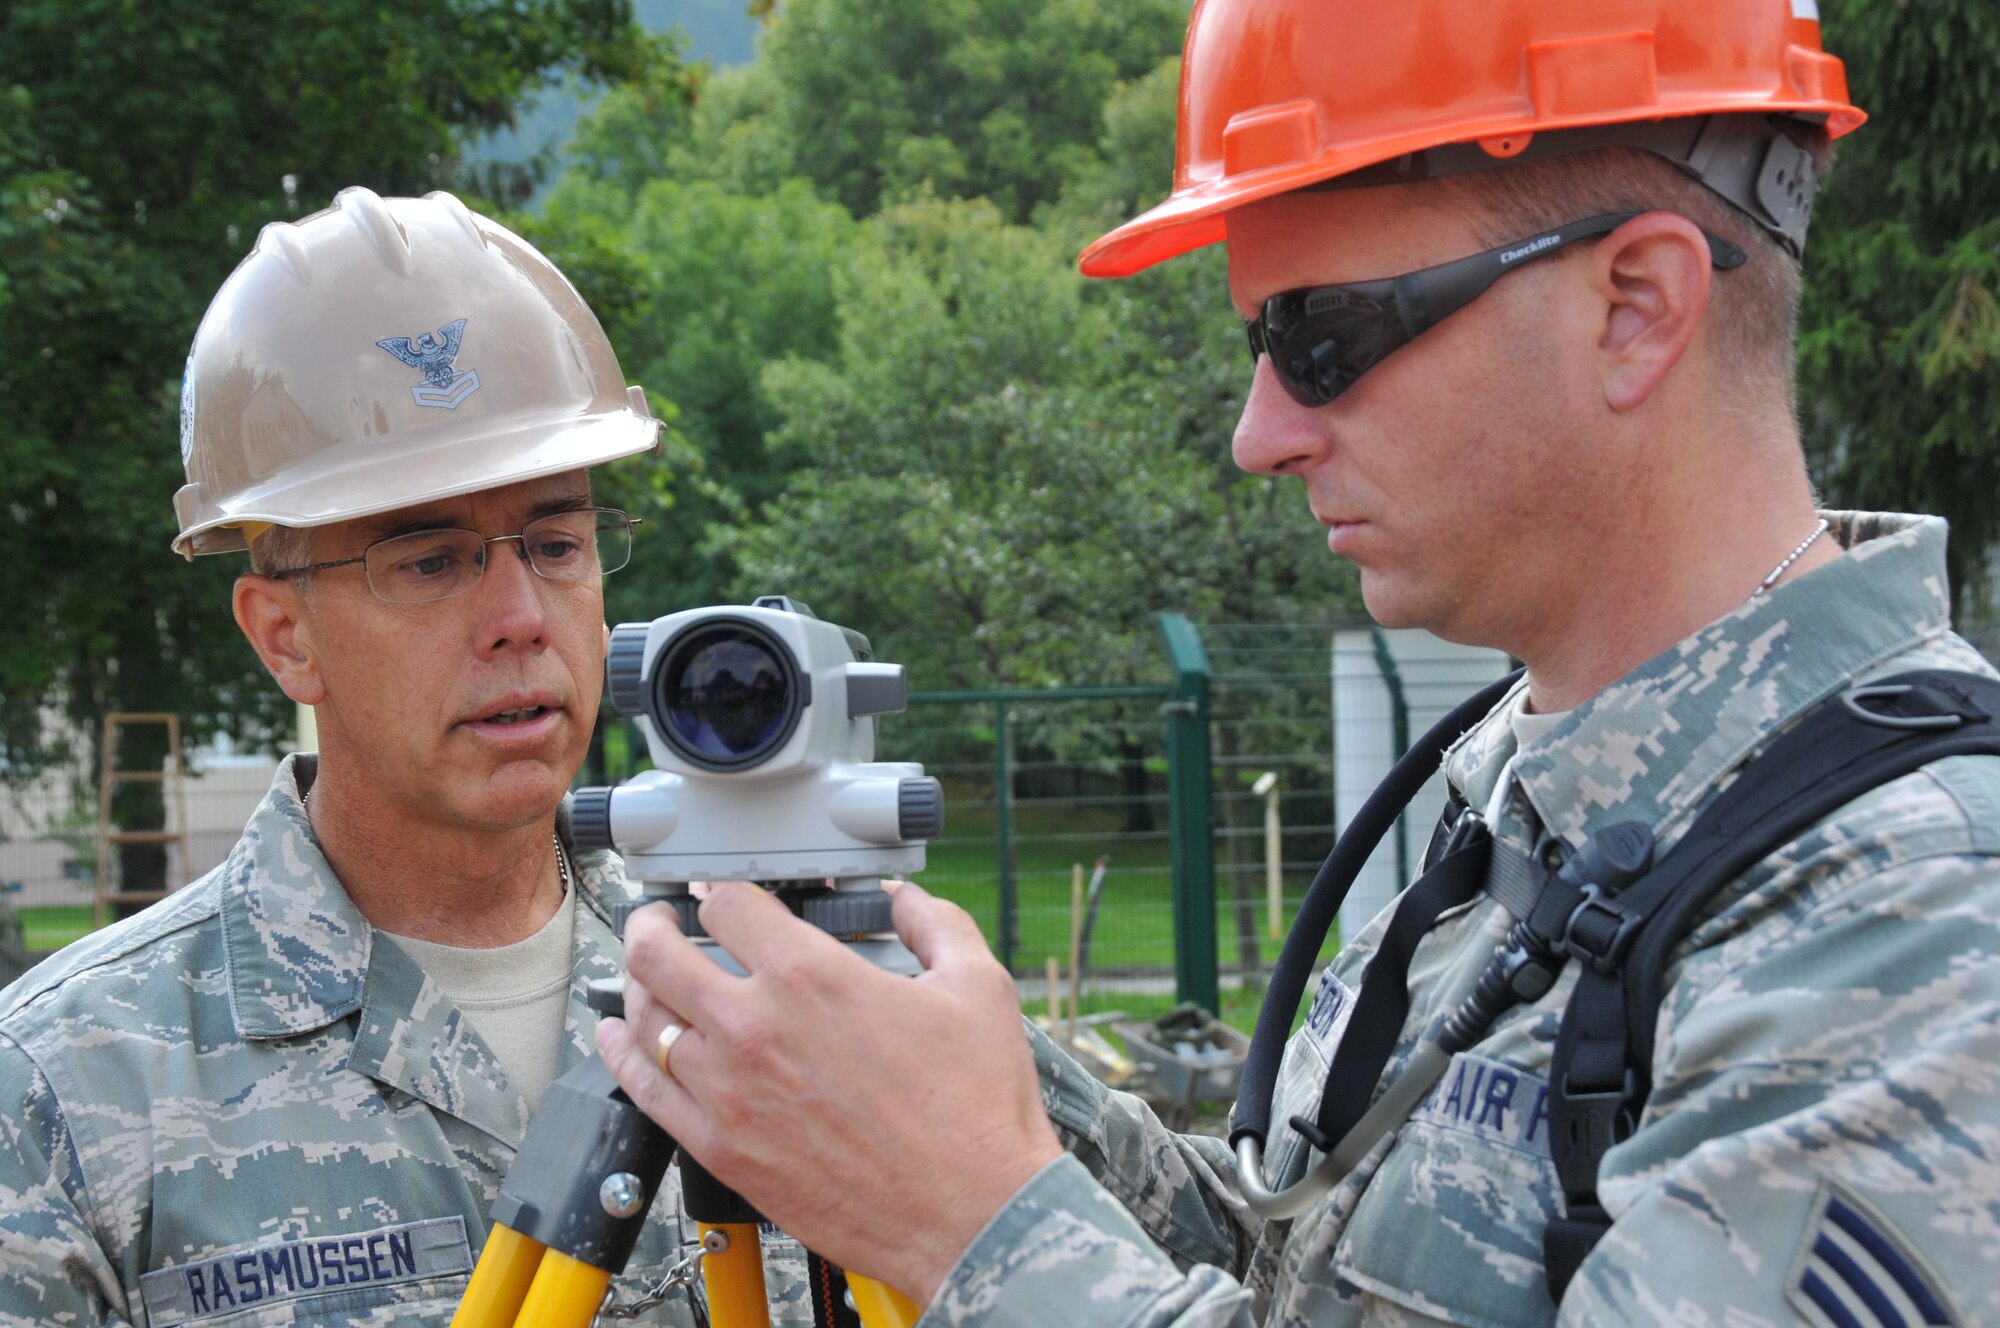 Staff Sgt. Tom Rasmussen, 153rd Civil Engineer Squadron engineering assistant, teaches Senior Airman Joel Johnson, engineering assistant in training, how to take measurements using a self-leveling level, Aug. 13, 2012, at the NATO School, Oberammergau, Germany. Airmen from the 153rd CES are putting their skills to work as they conduct their annual training. (U.S. Air Force photo by Staff Sgt. Natalie Stanley)